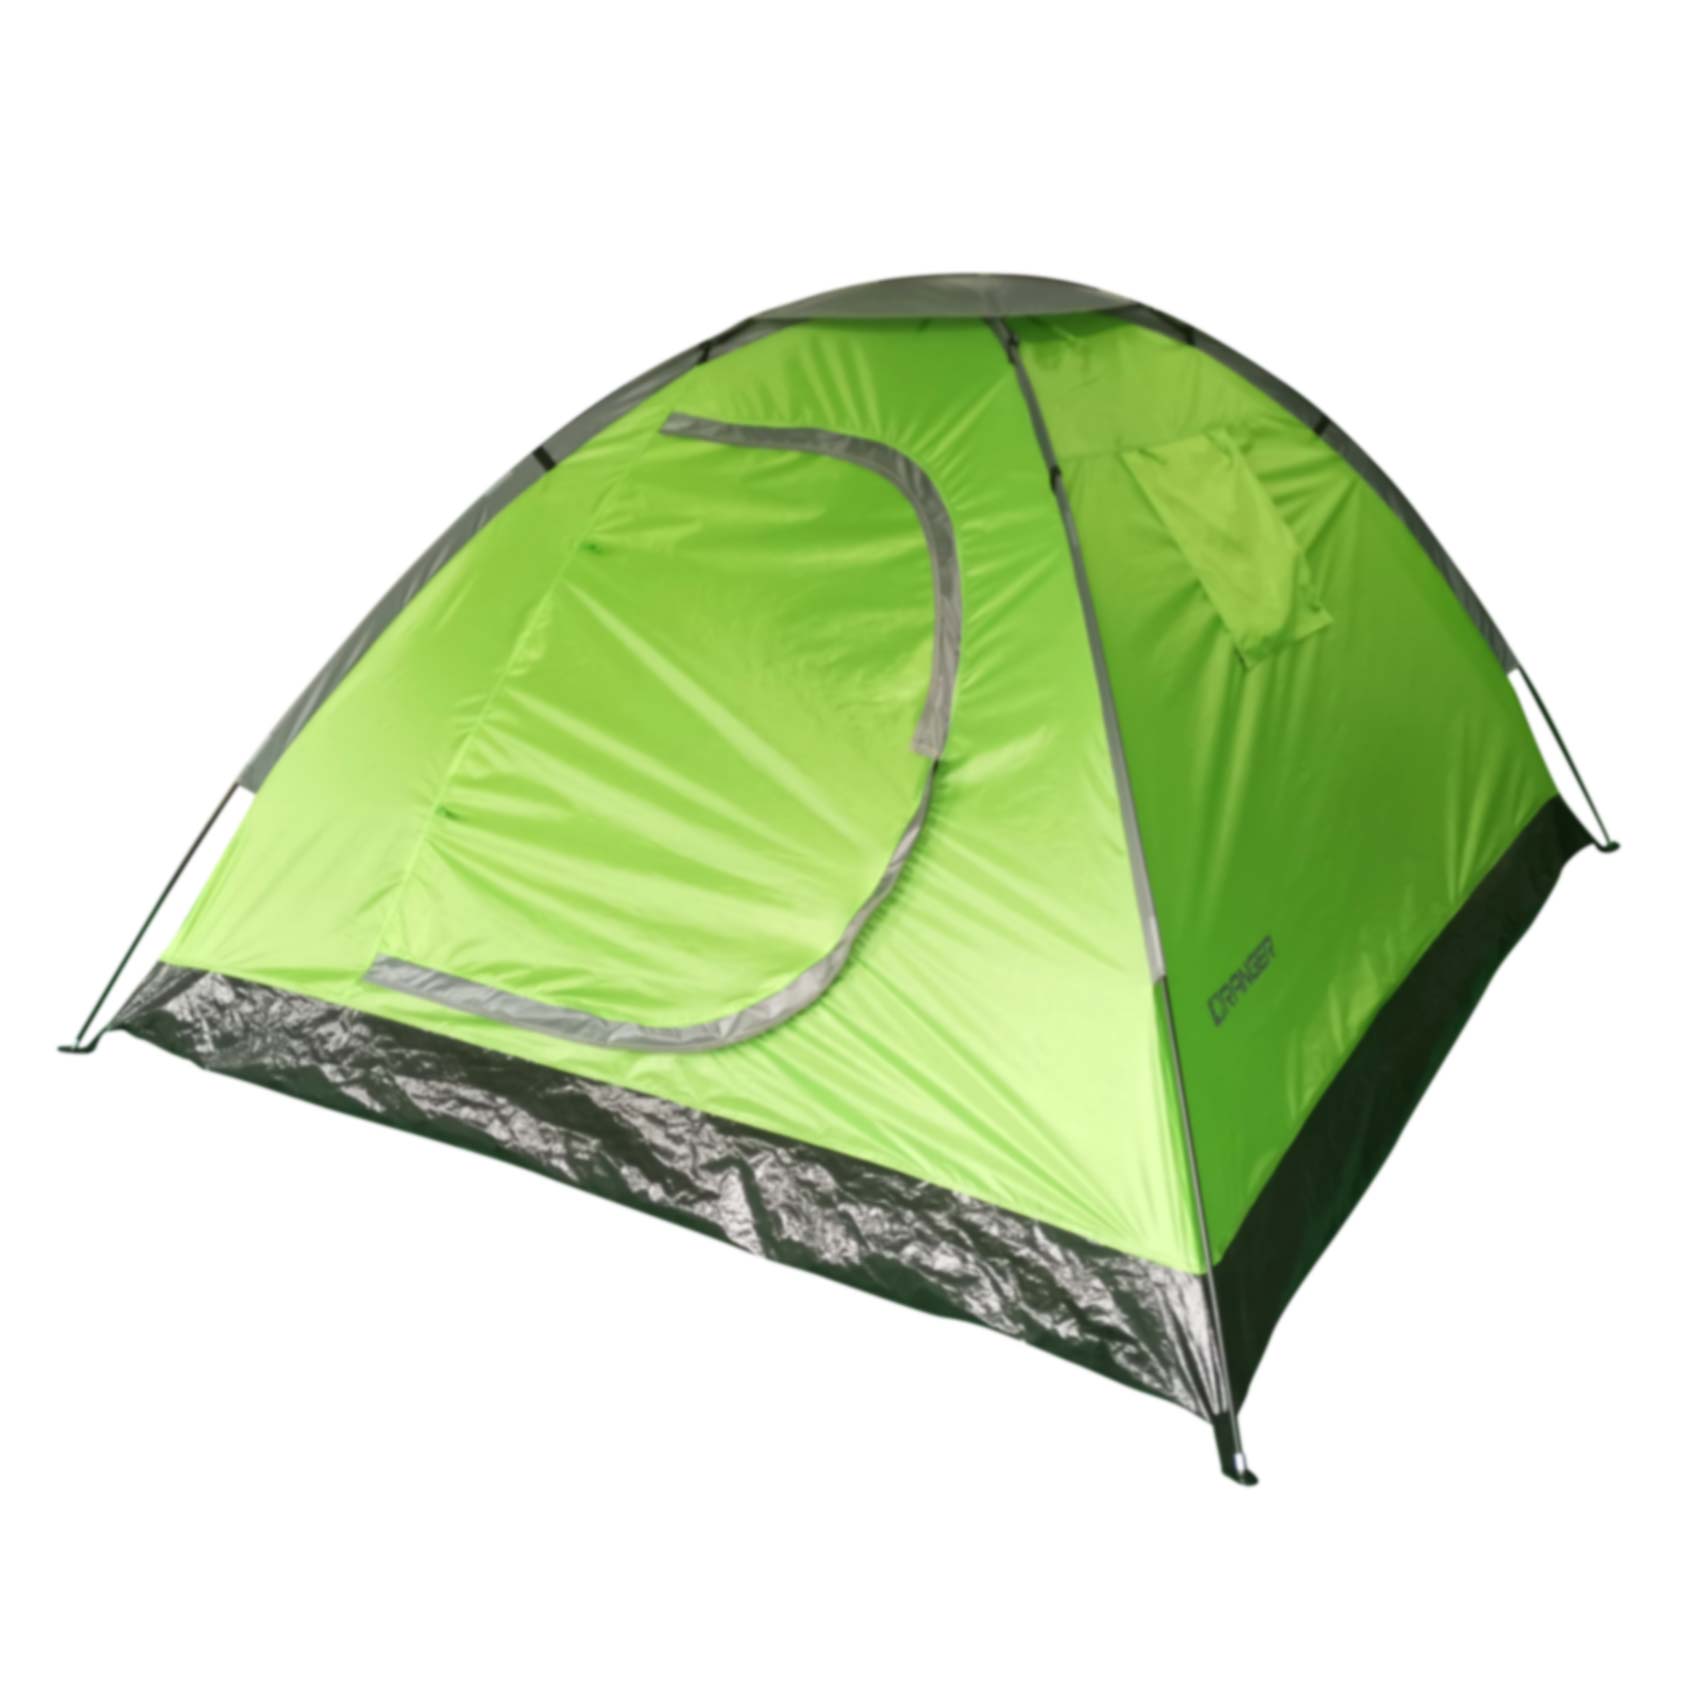 Hk Camping Tent 4 Persons 240 X 210 X 130 Cm Green